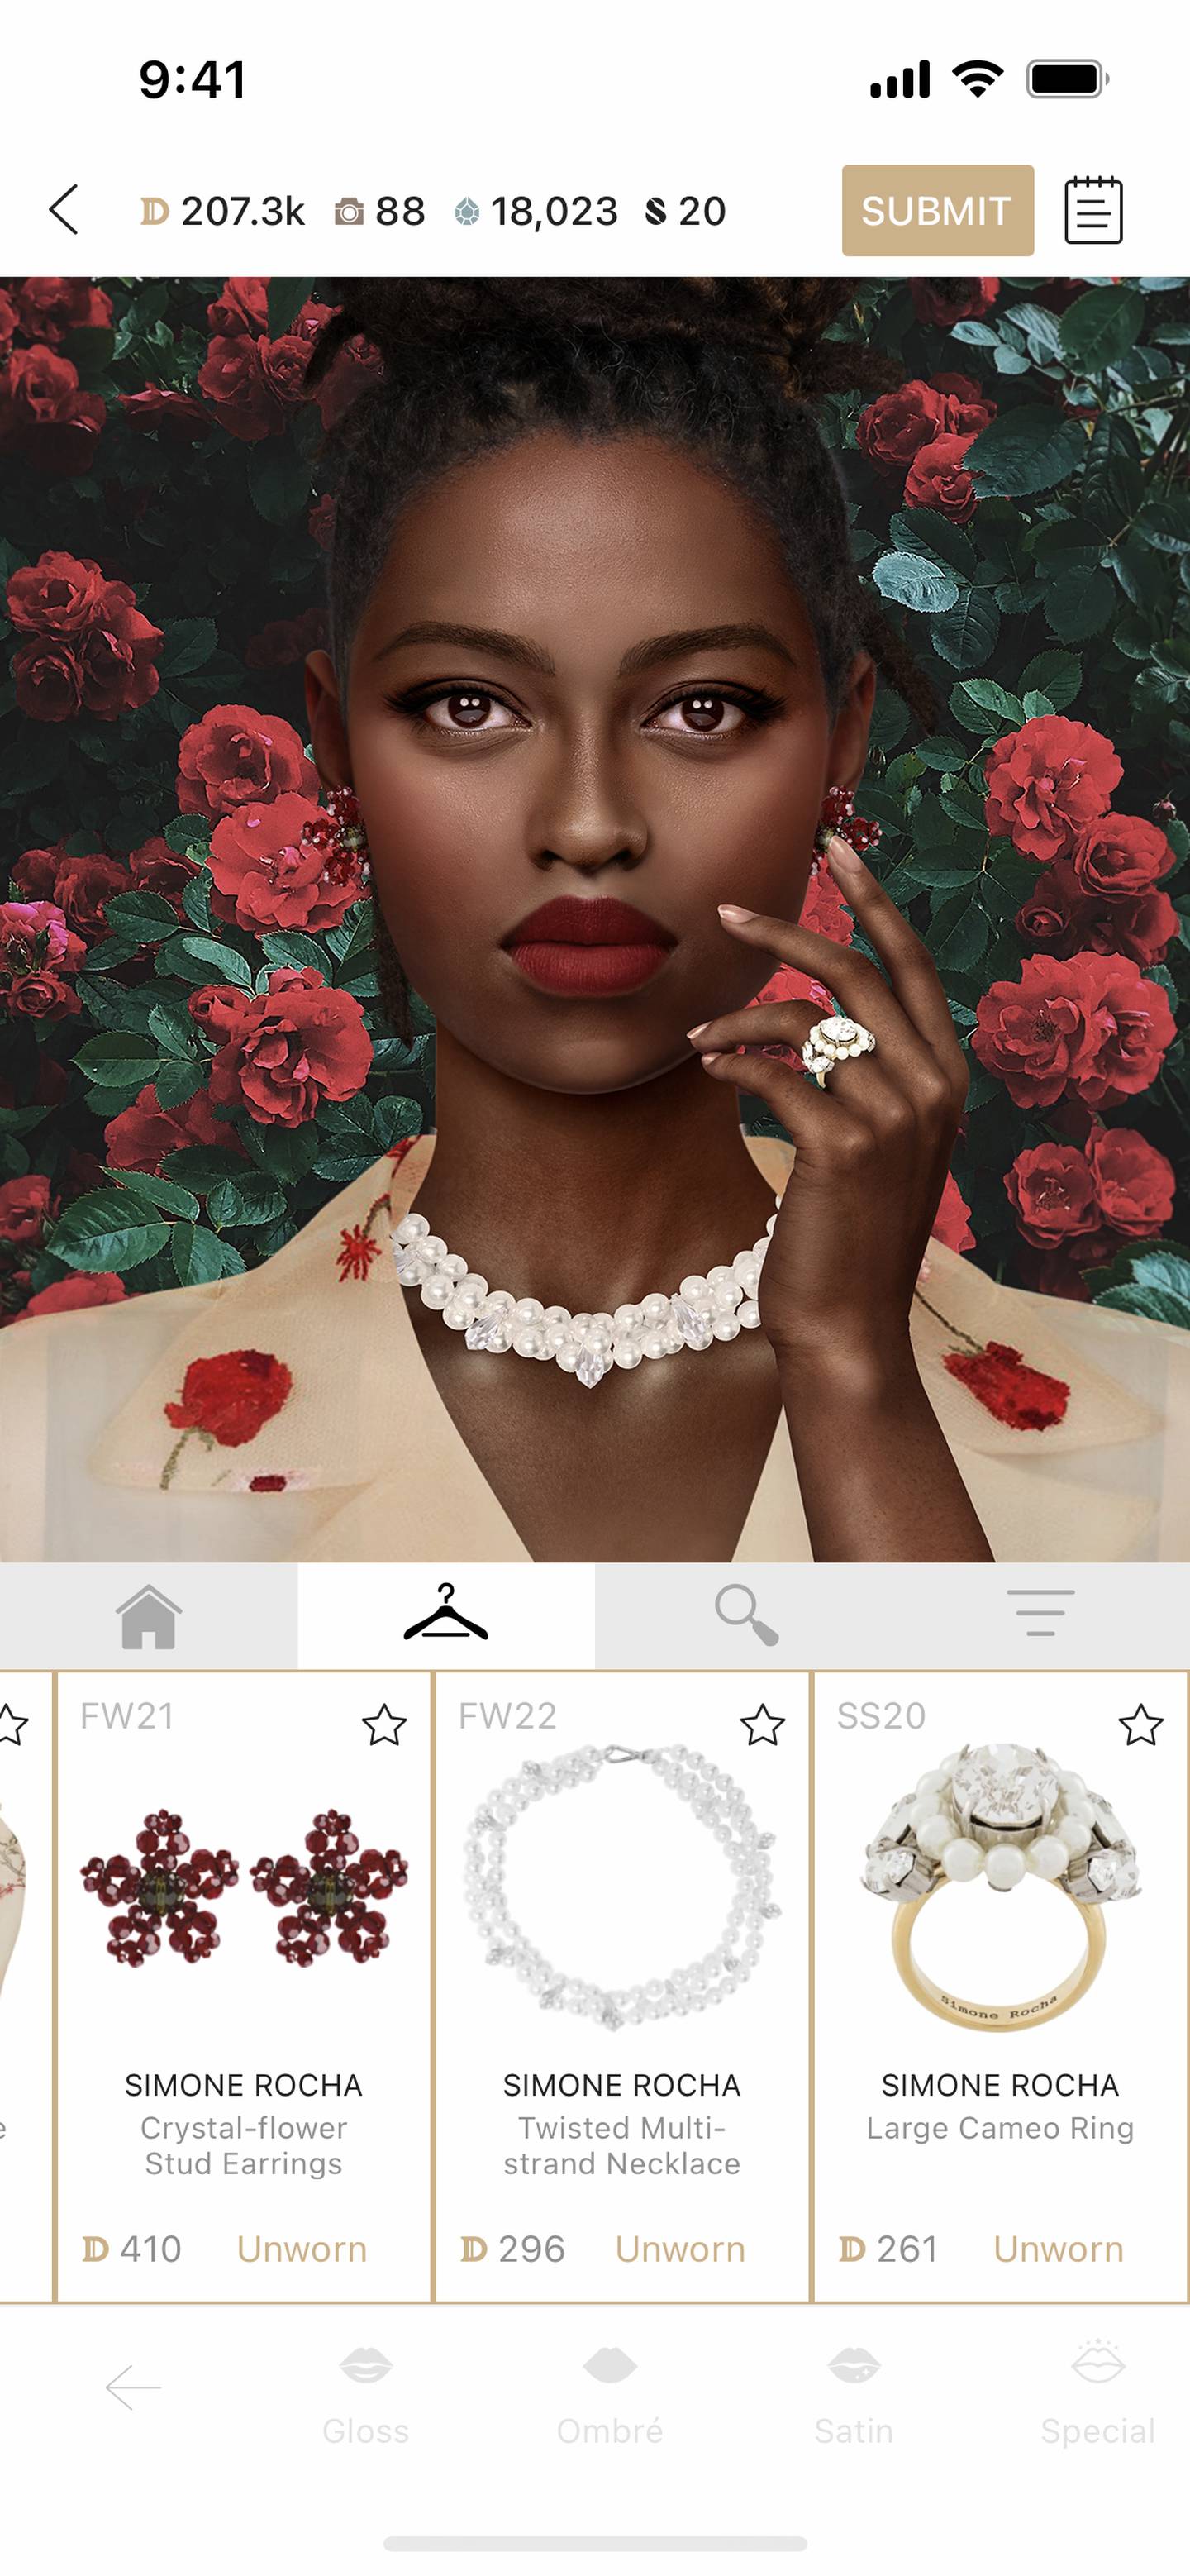 A screen capture from the game shows a digital model in a Simone Rocha necklace, earrings and ring.